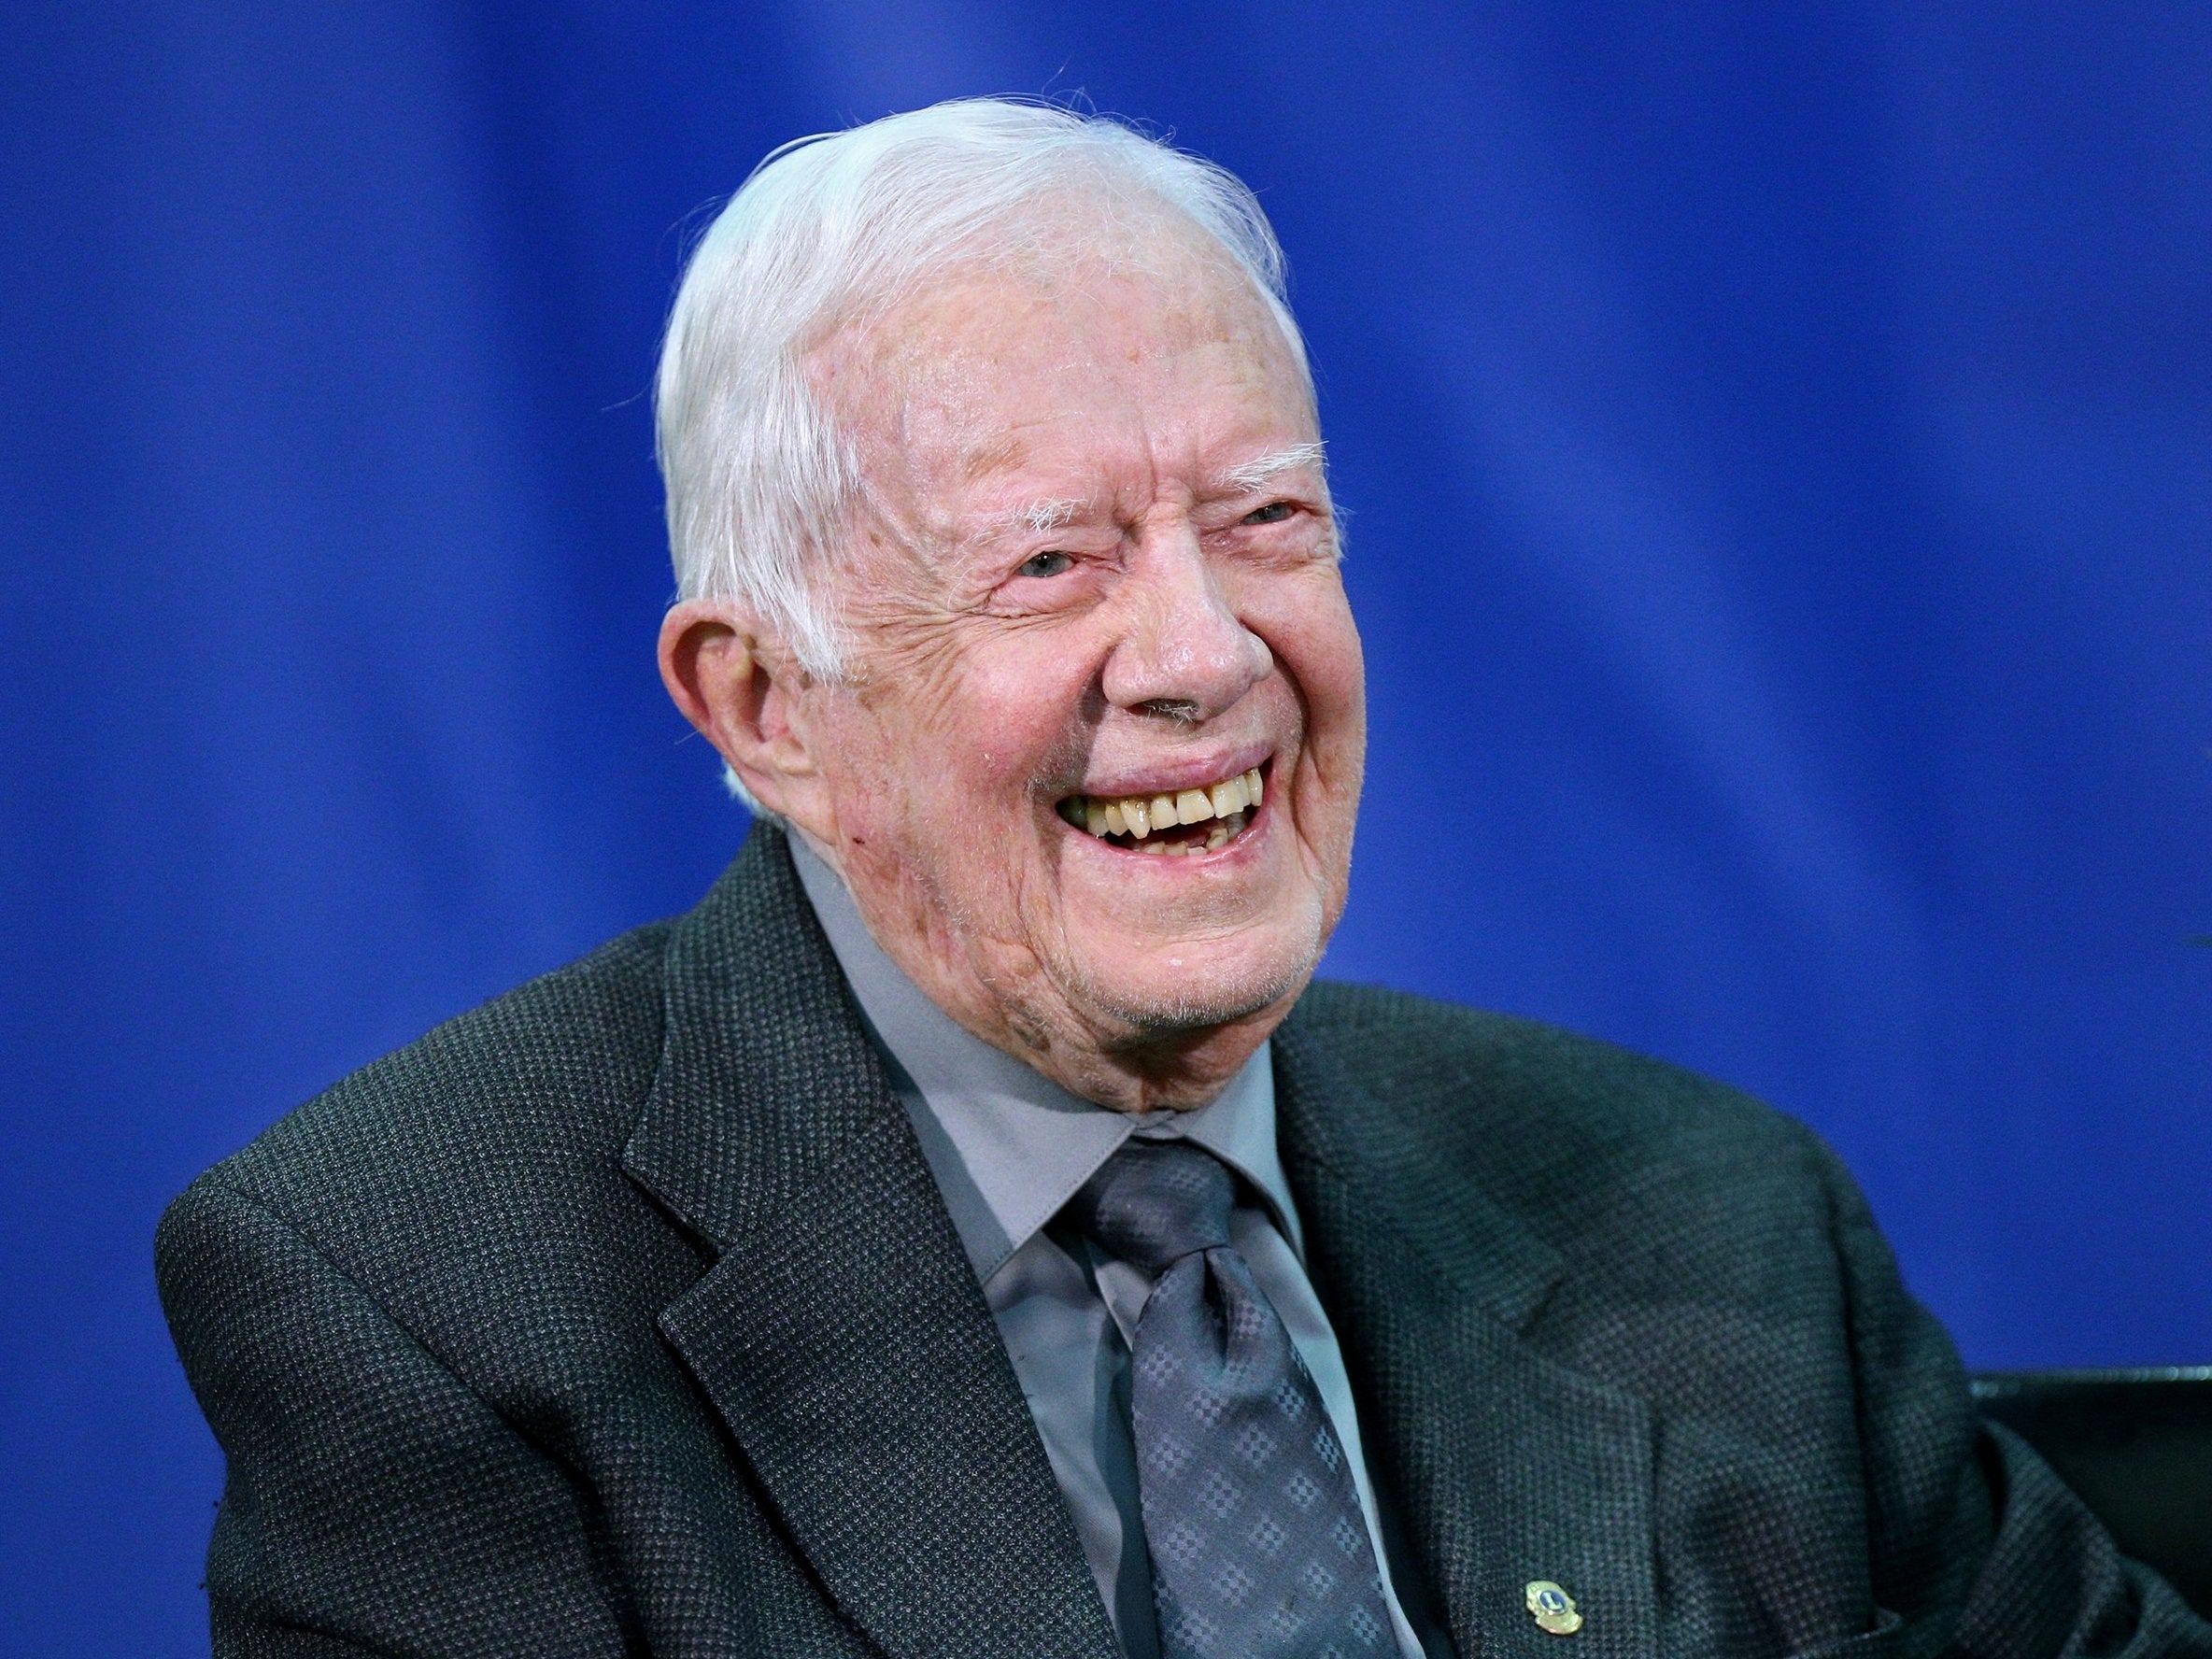 Jimmy Carter questions Trump's legitimacy, says he was 'put into office because the Russians interfered'